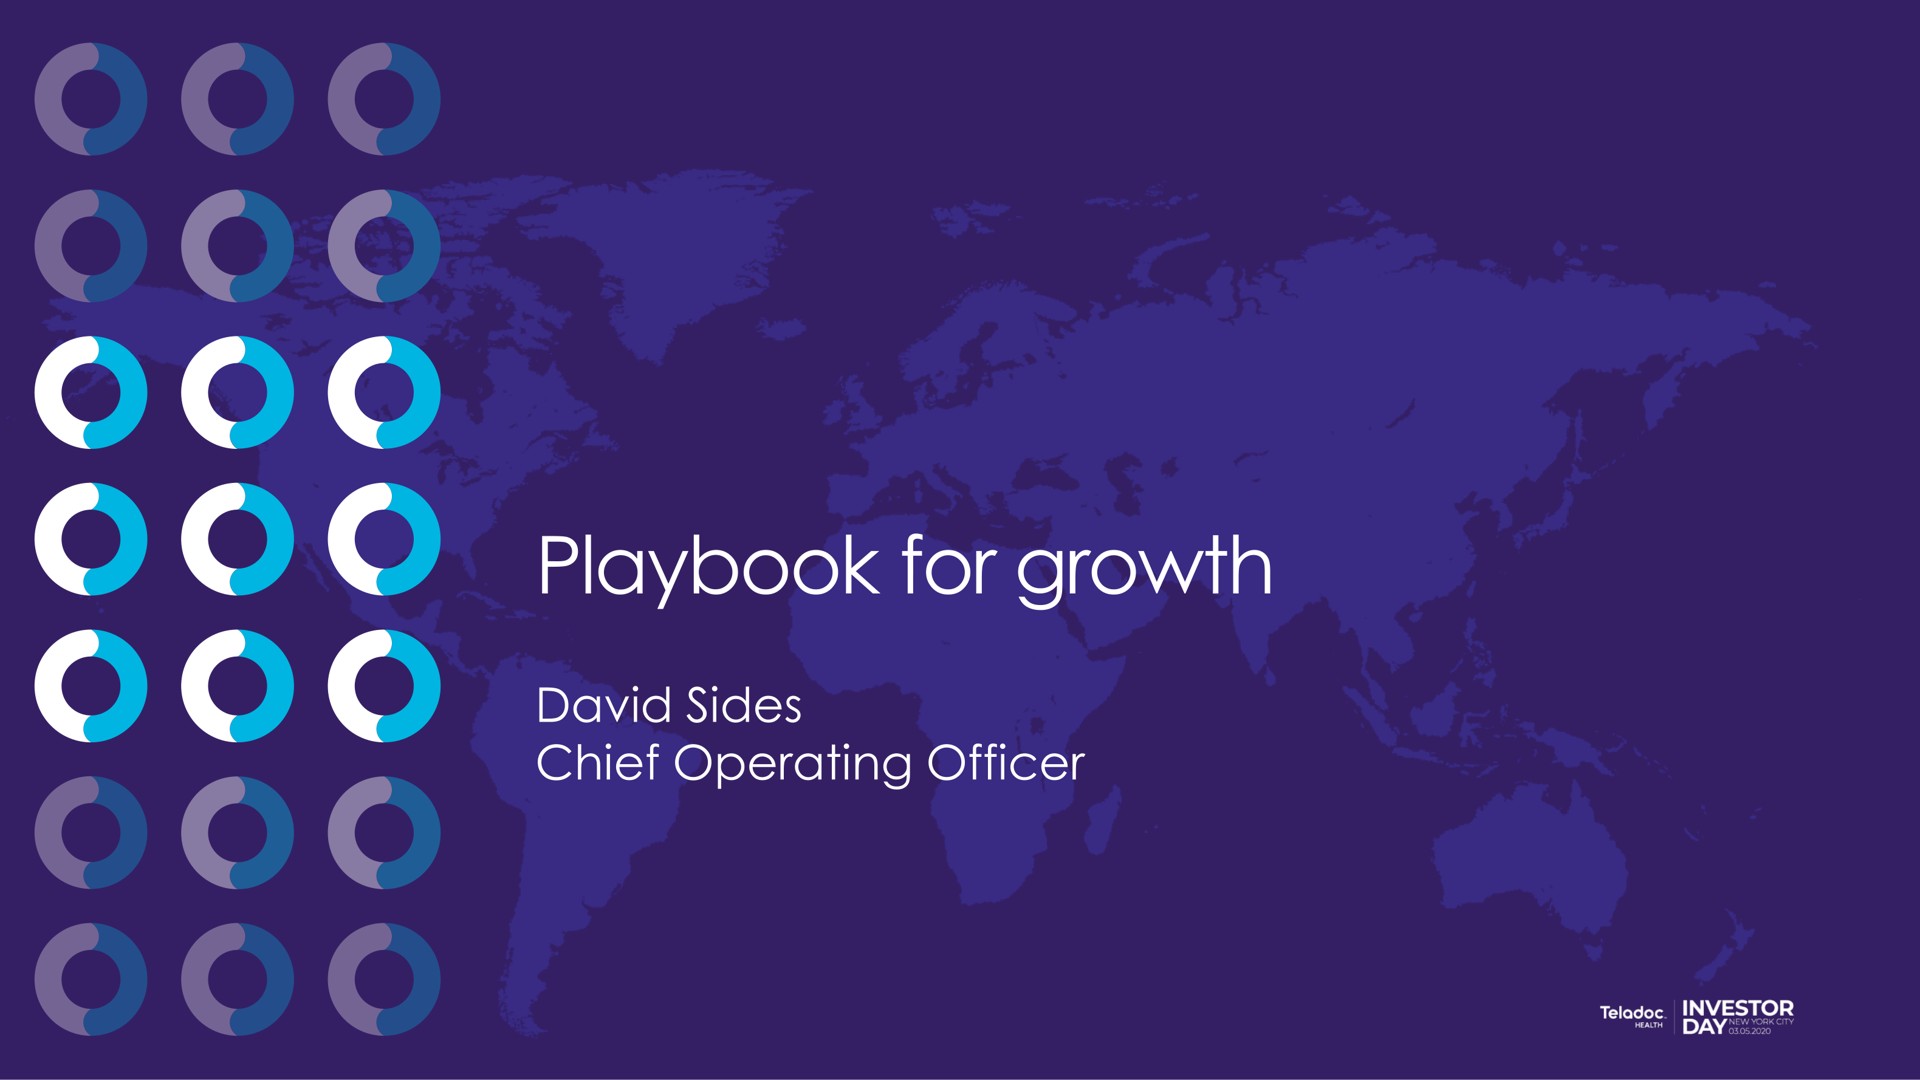 a a playbook for growth | Teladoc